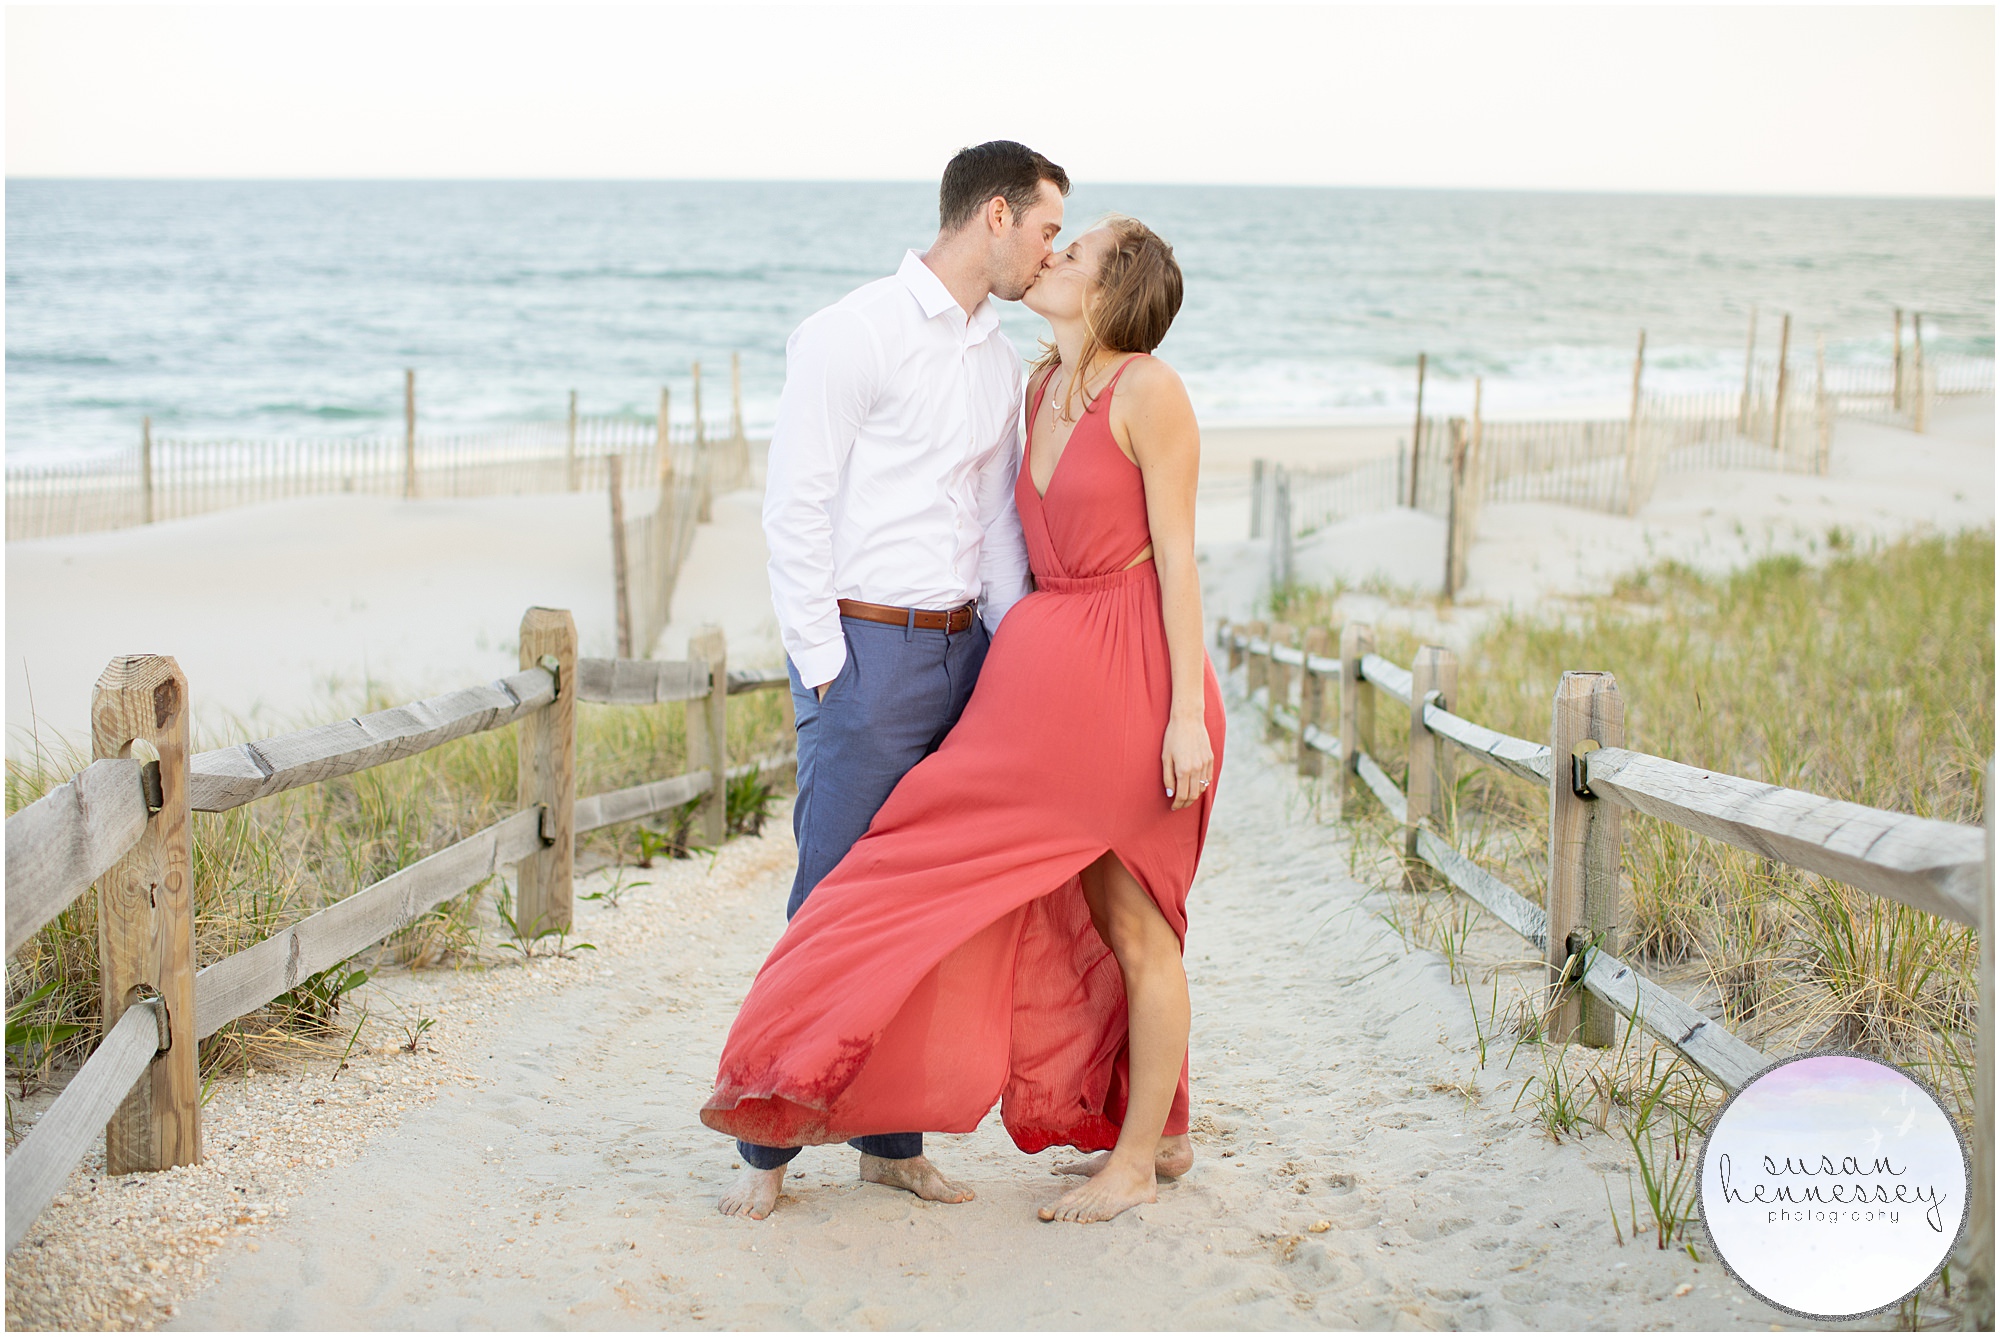 Engagement photography at Long Beach Island